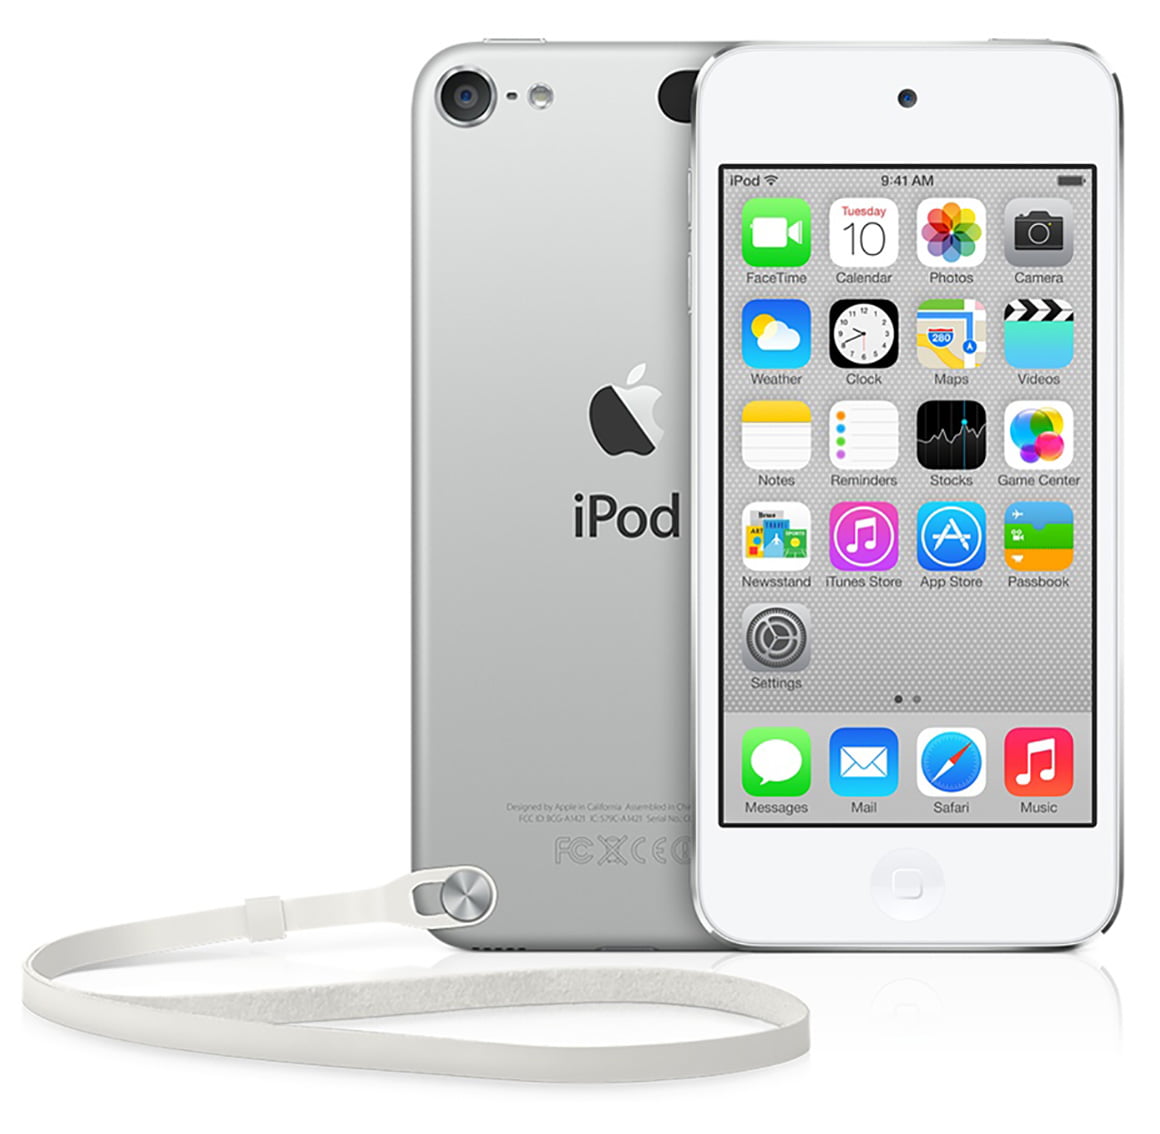 Apple iPod Touch A1421 32GB (5th Generation) - White (Certified Refurbished) - Walmart.com